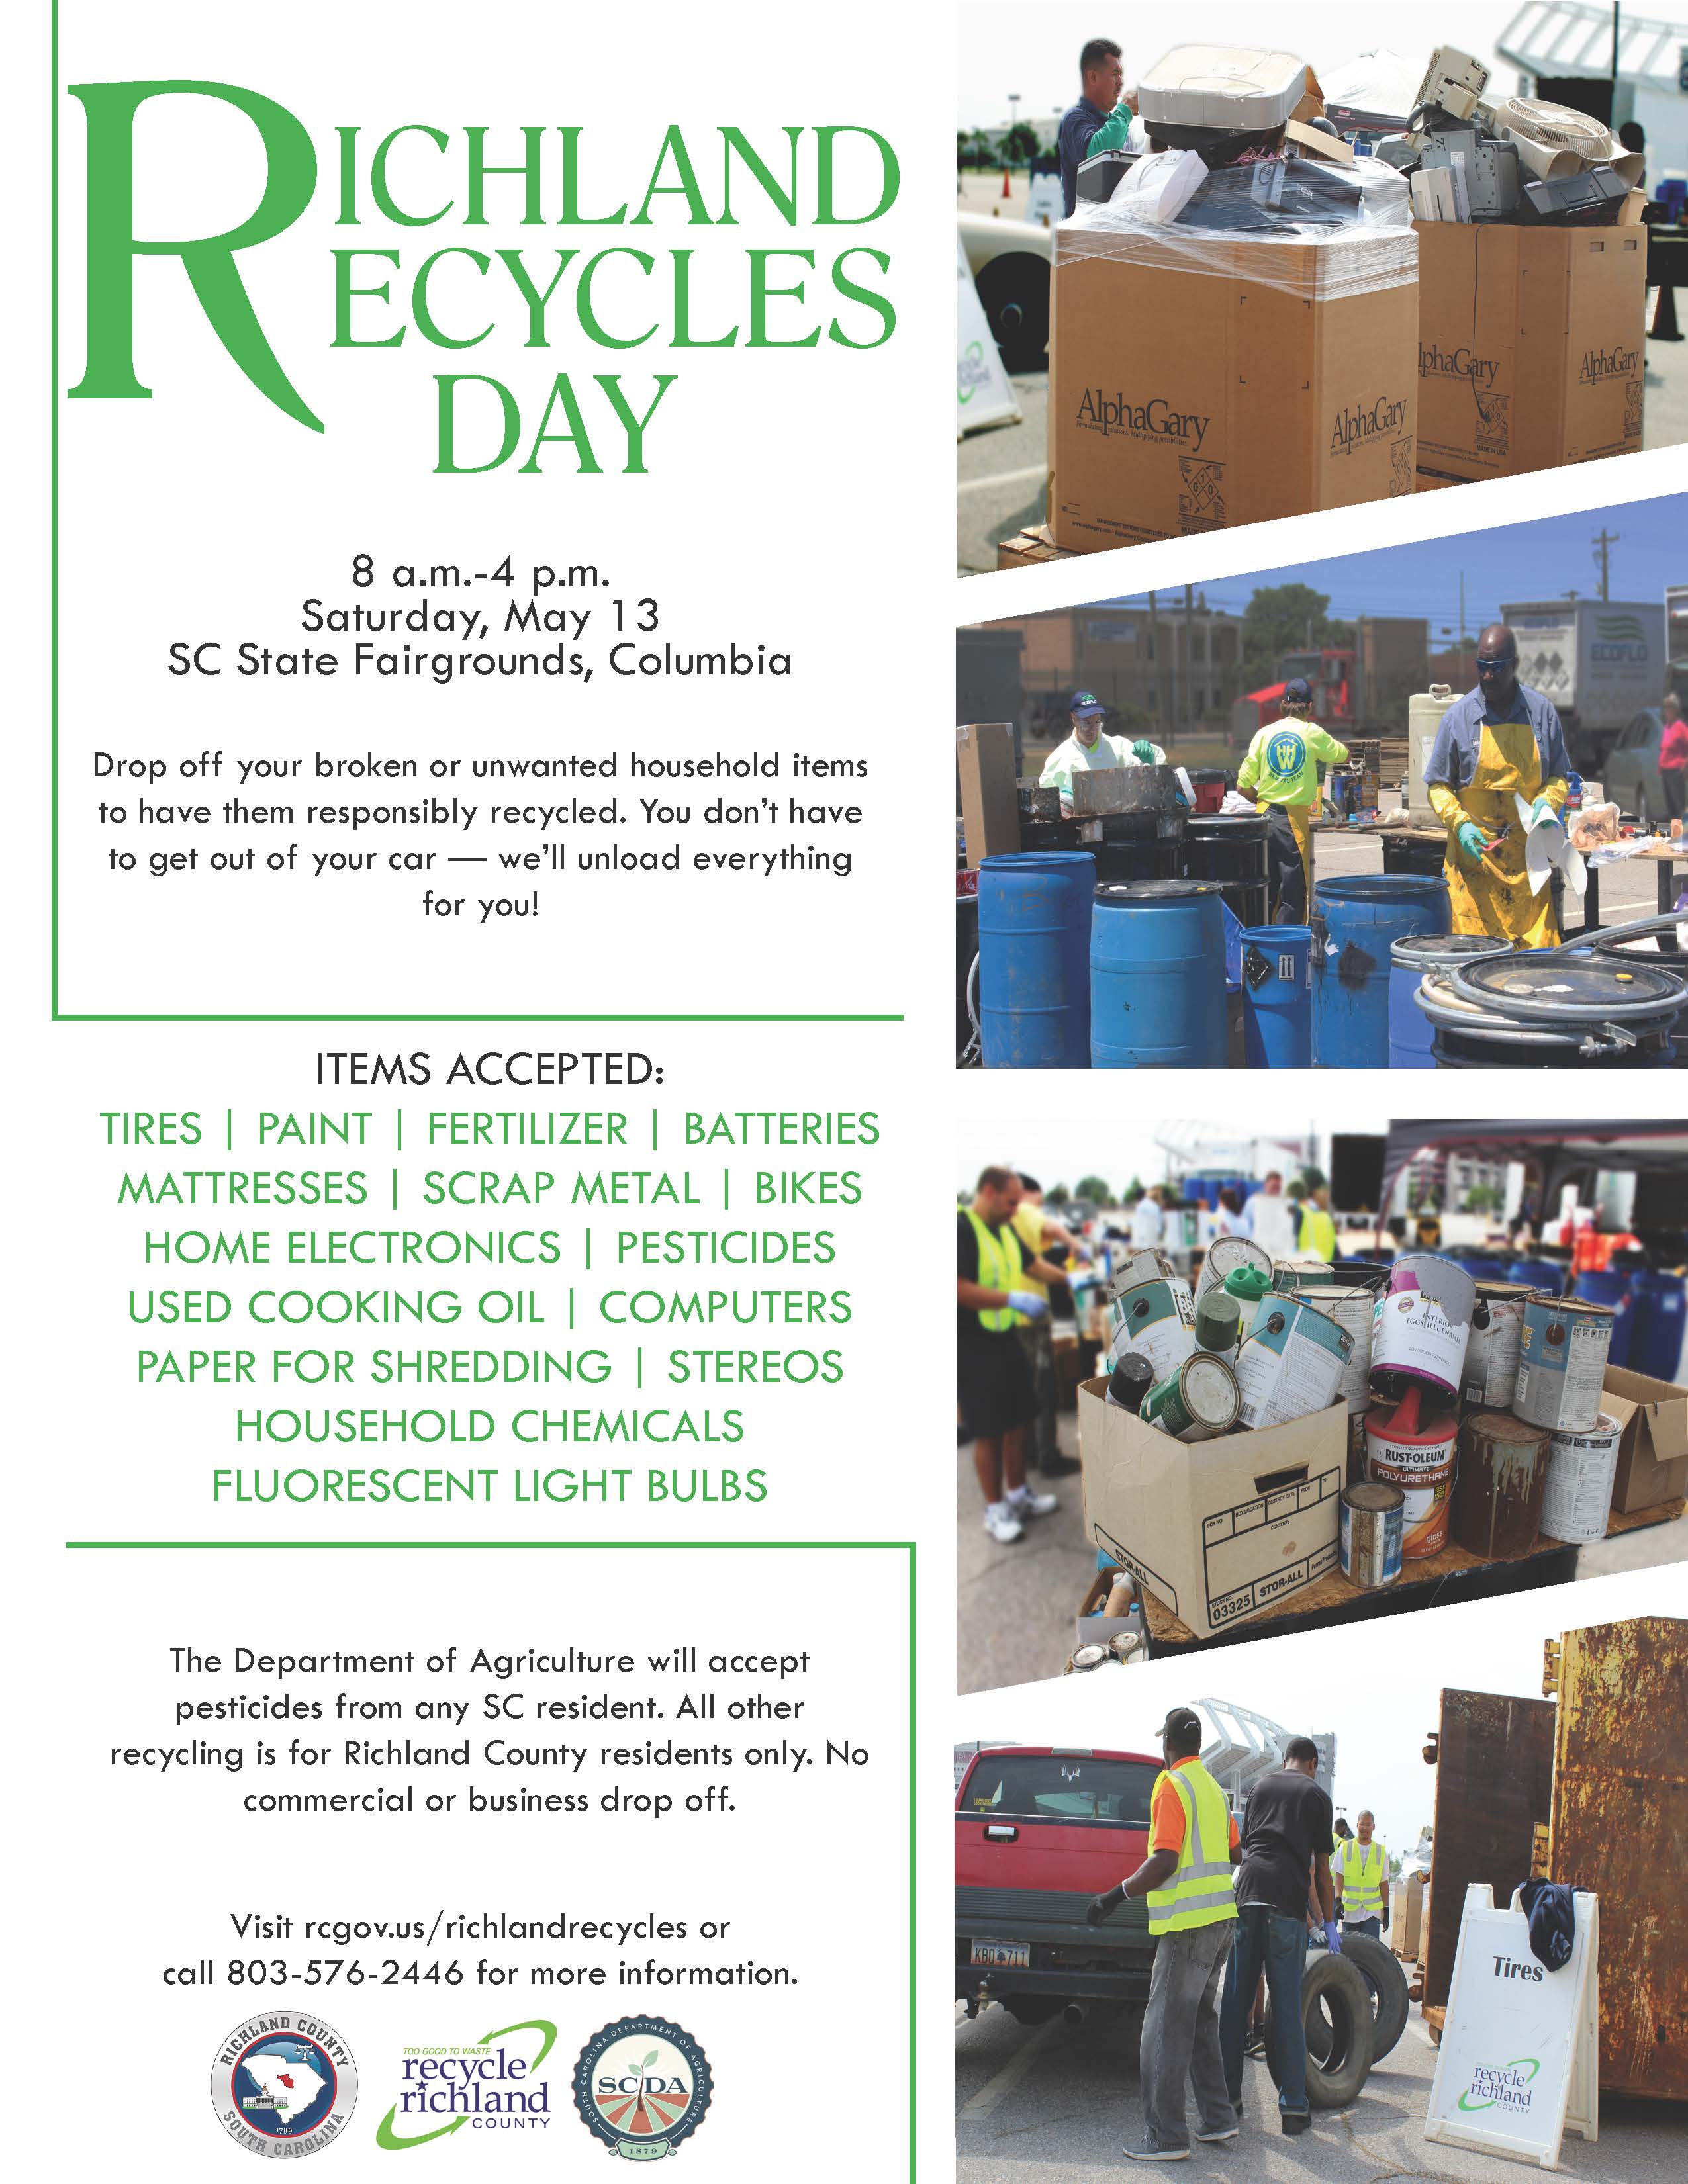 Richland Recycles Day